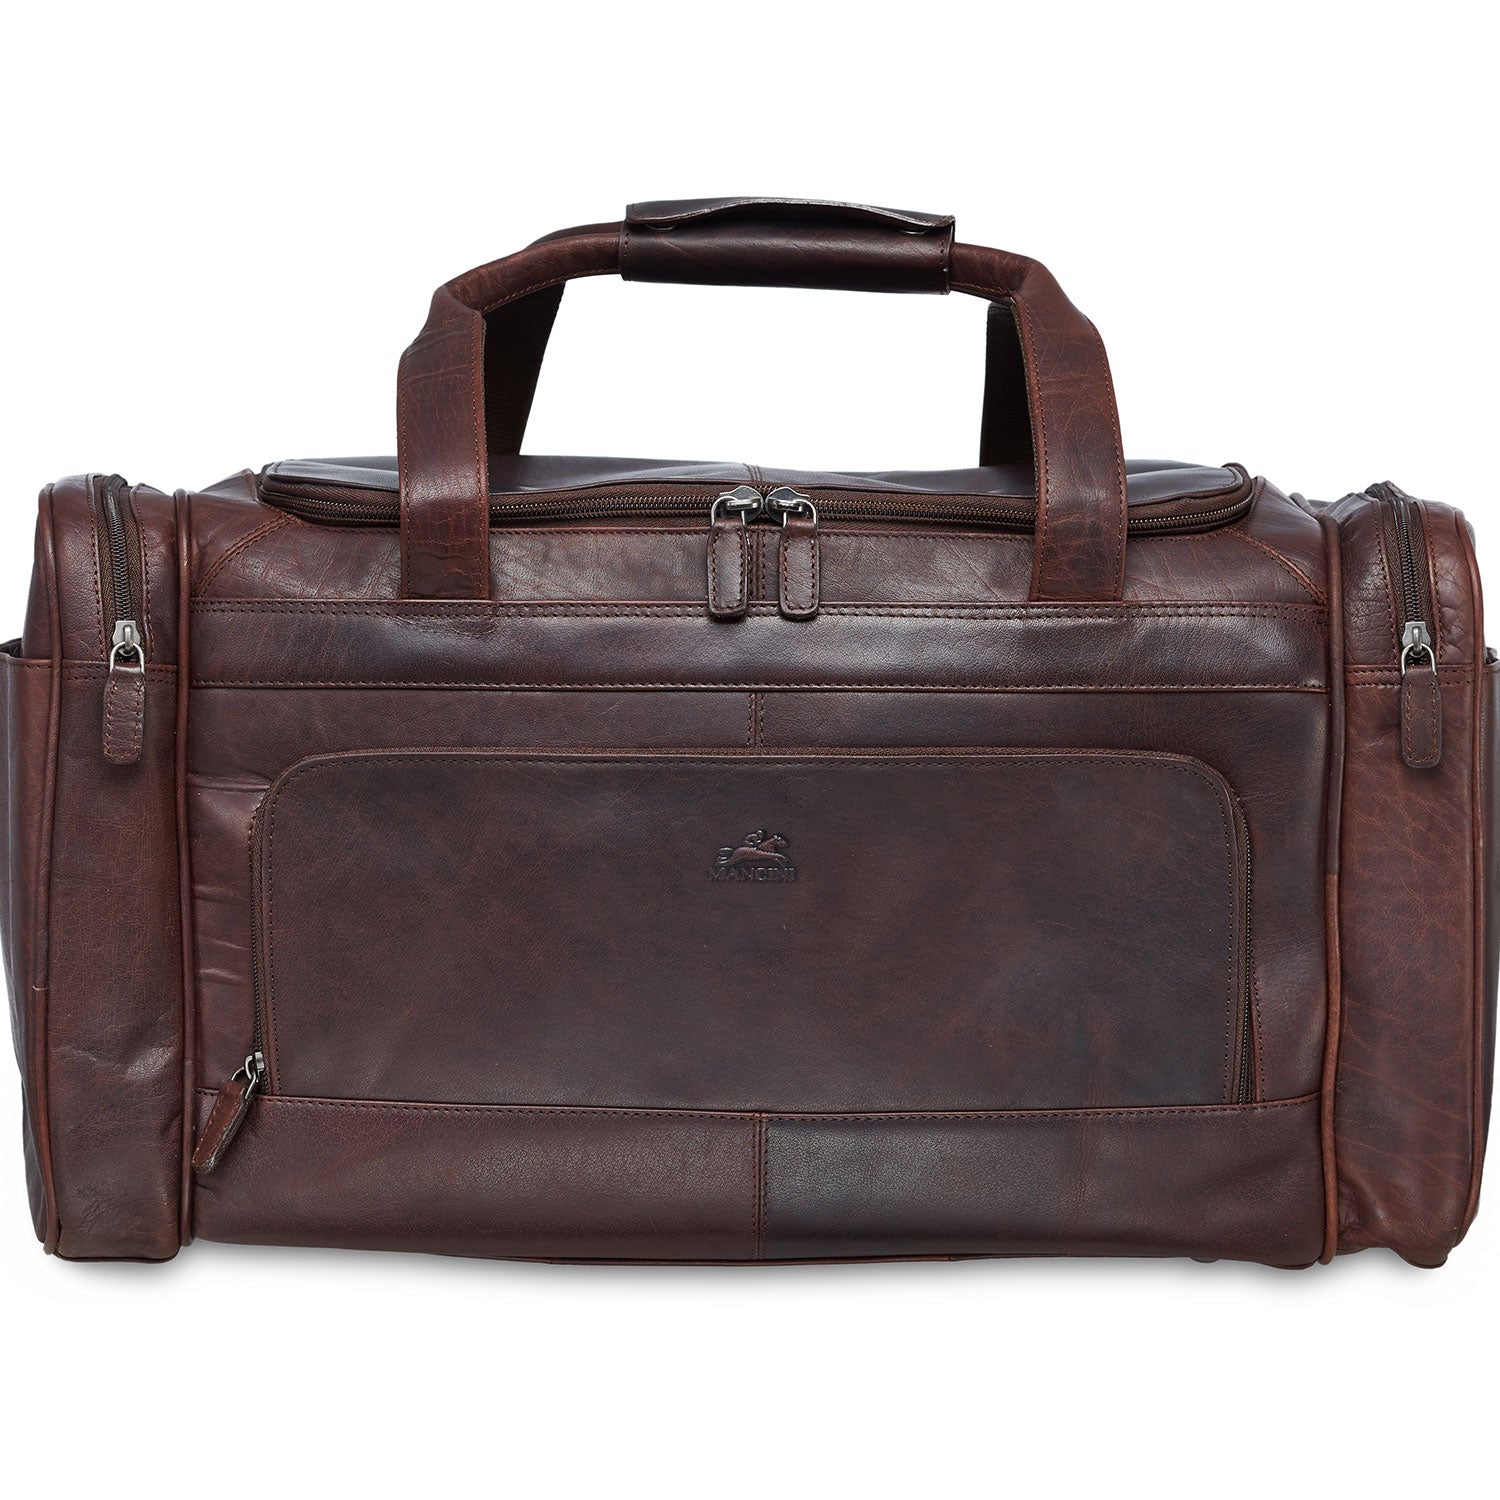 Mancini Leather Carry-on Duffle Bag, 20" x 10.75" x 10.75", Brown